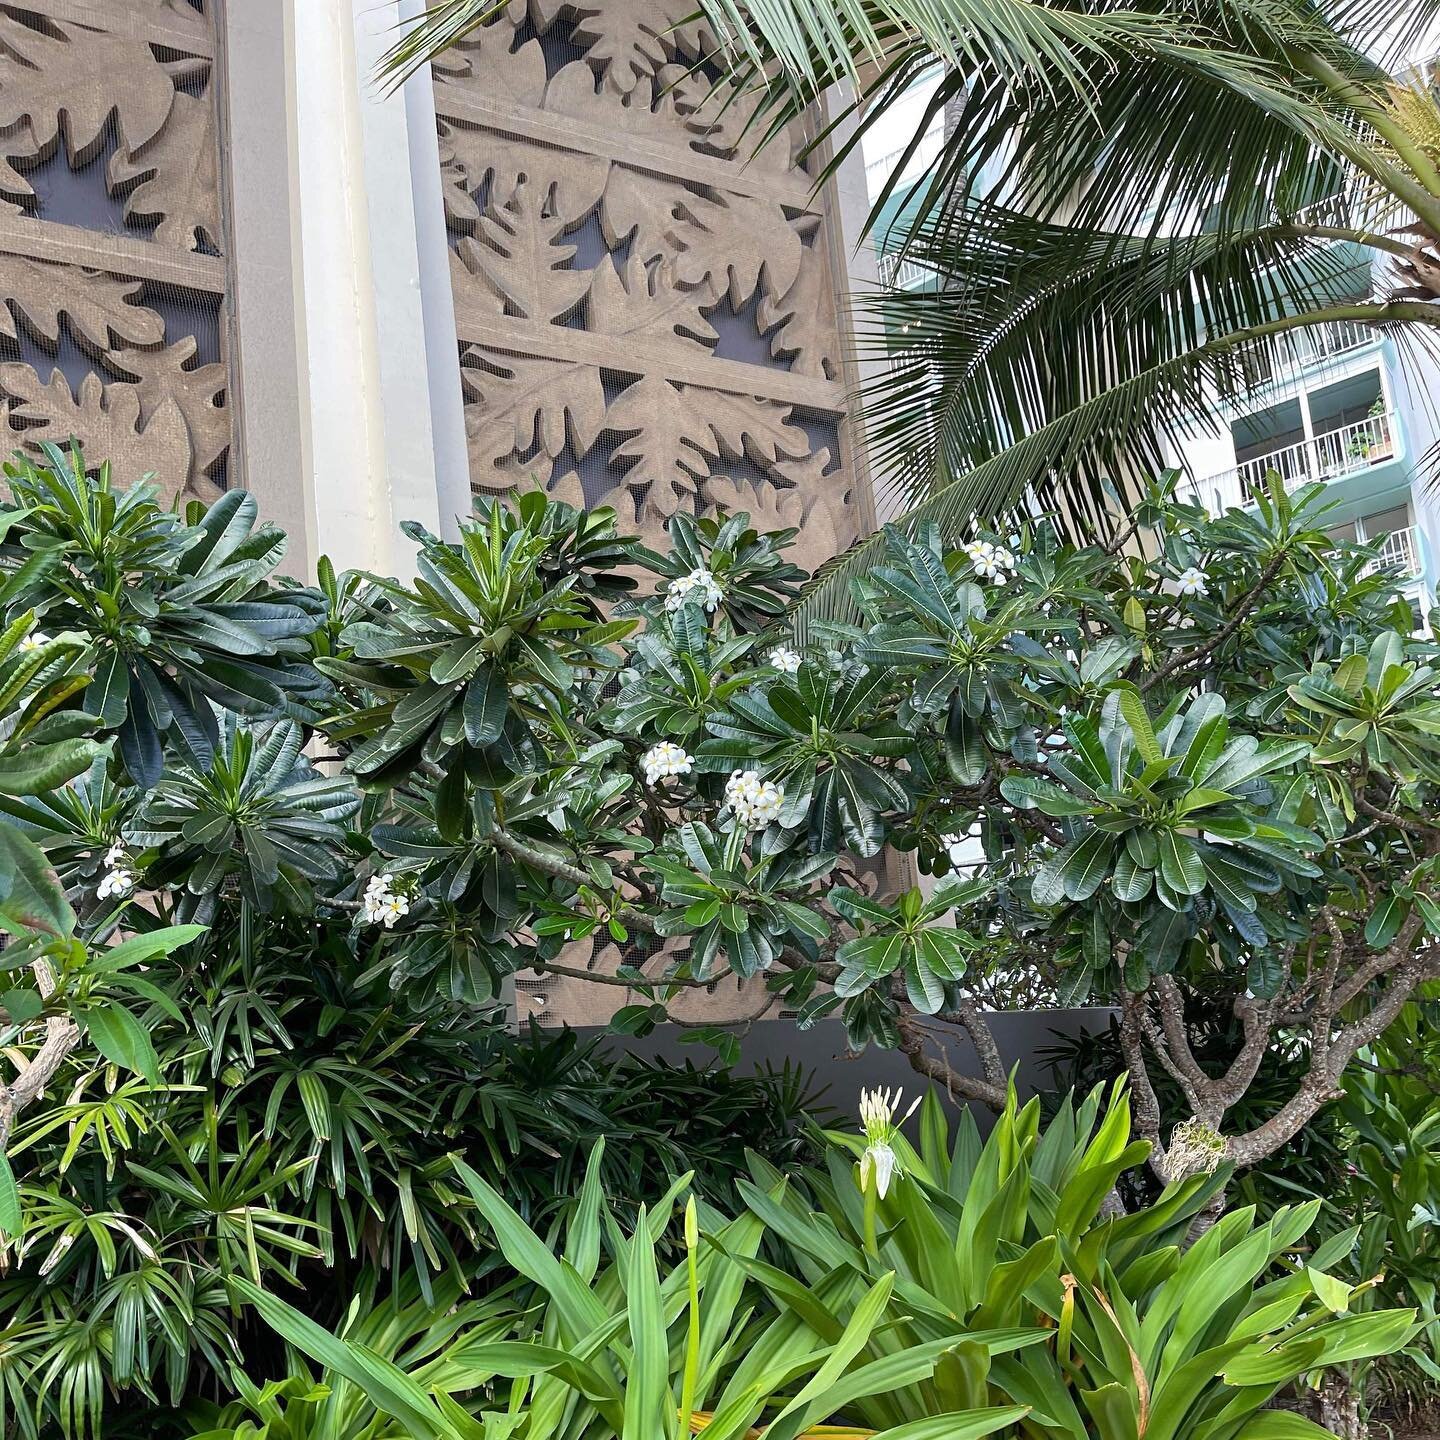 Singapore plumeria trees transferred from Jim Little Nursery and farm to Queen Kapiʻolani Hotel Waikīkī Beach a couple of years ago.
Picture taken this morning. They look good.
#plumeria